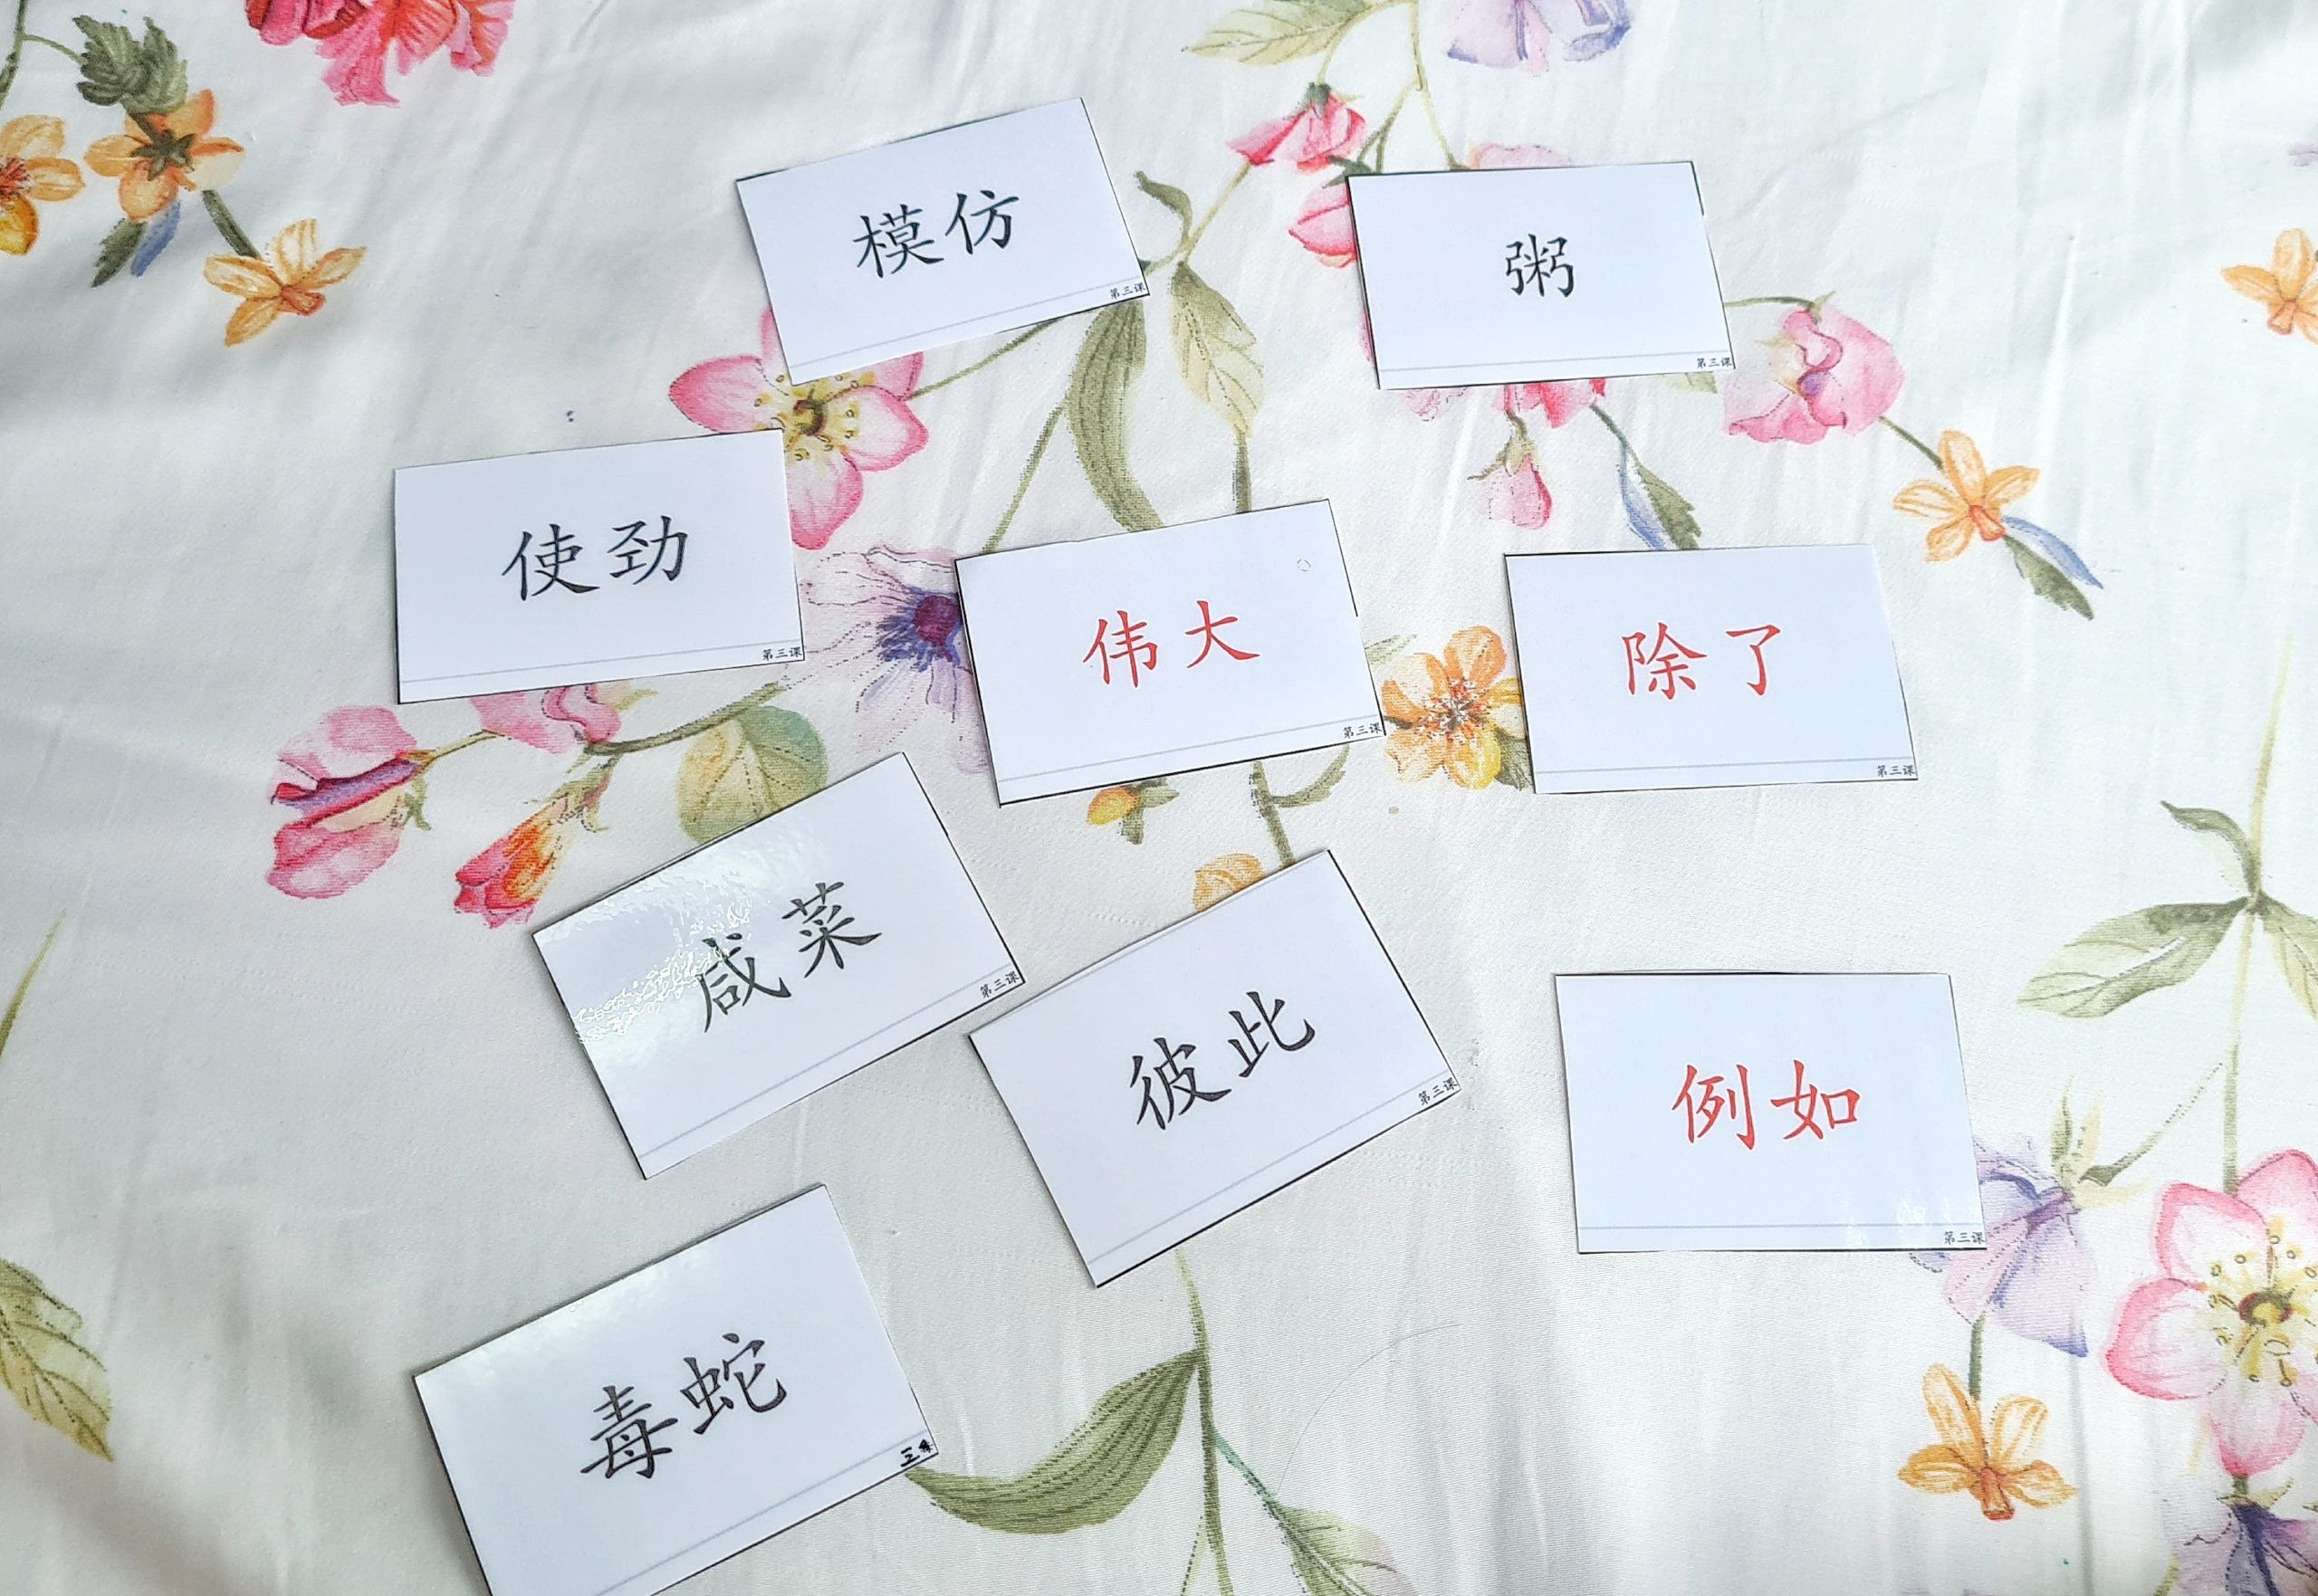 Free Printables - Primary 6 Chinese Flashcards | My Chirpy Life - Free Printable Mandarin Flashcards